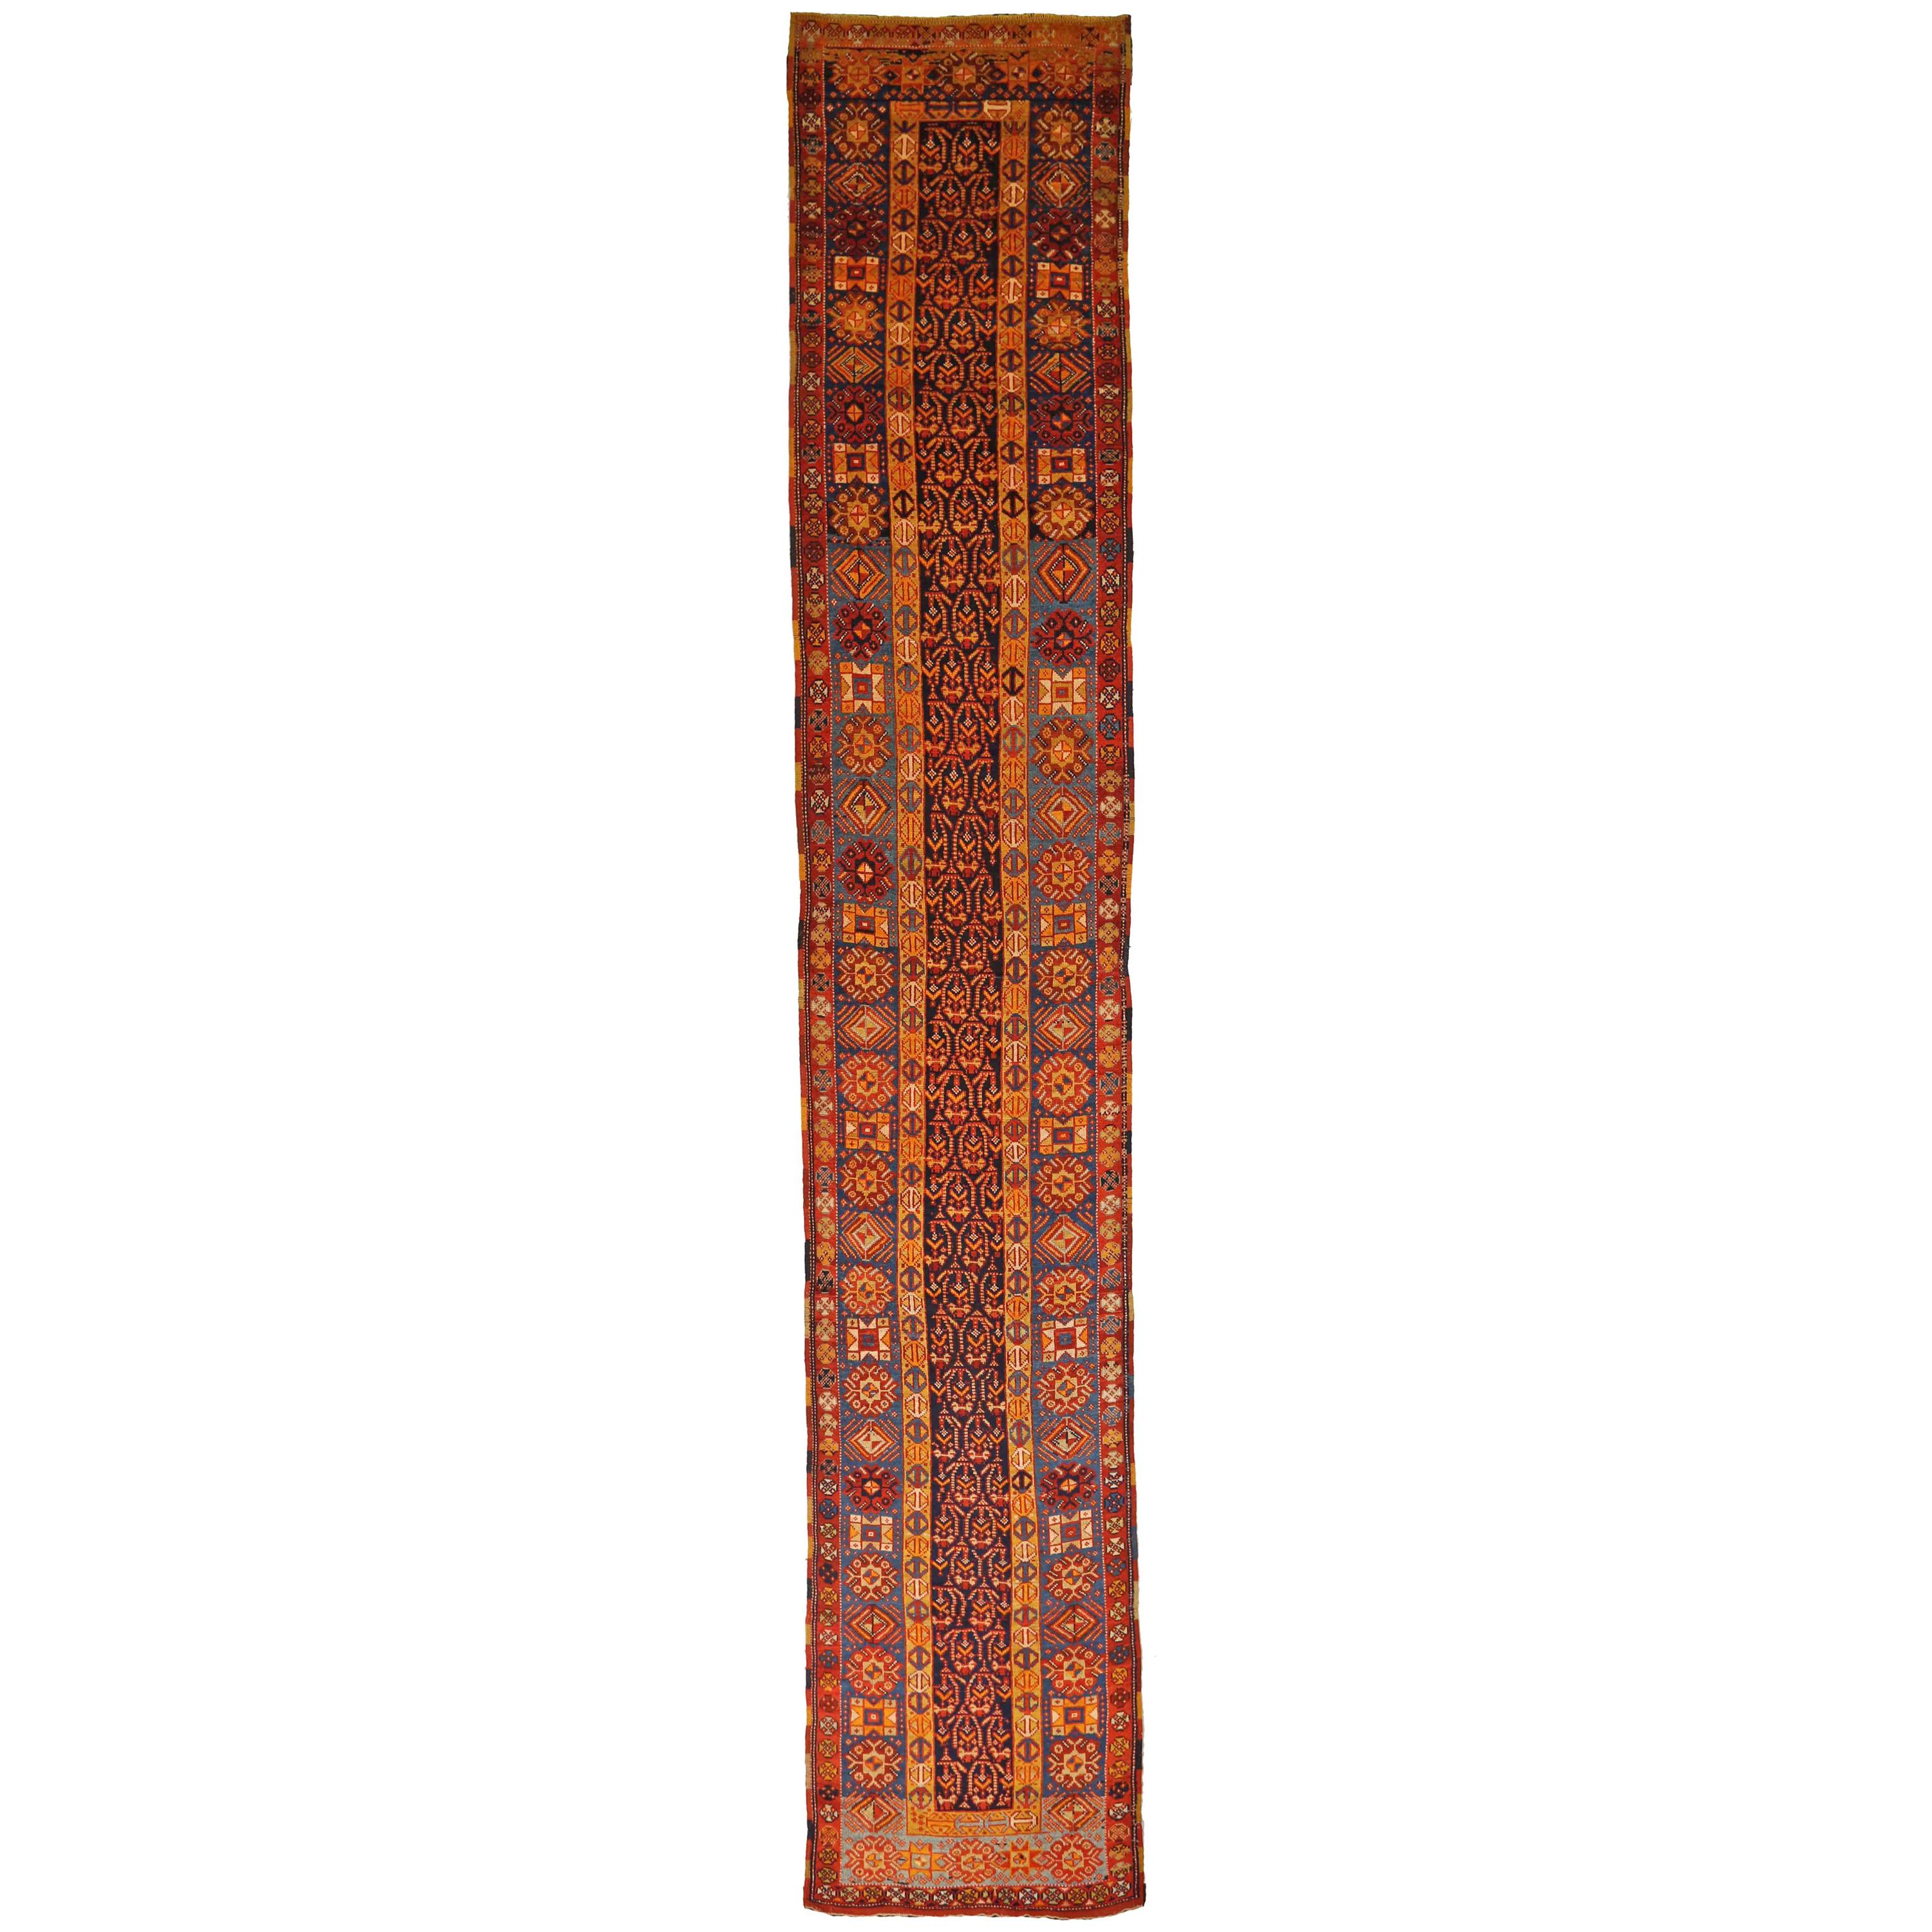 Antique Turkish Oushak Rug with Stunning Geometric Patterns, circa 1910s For Sale